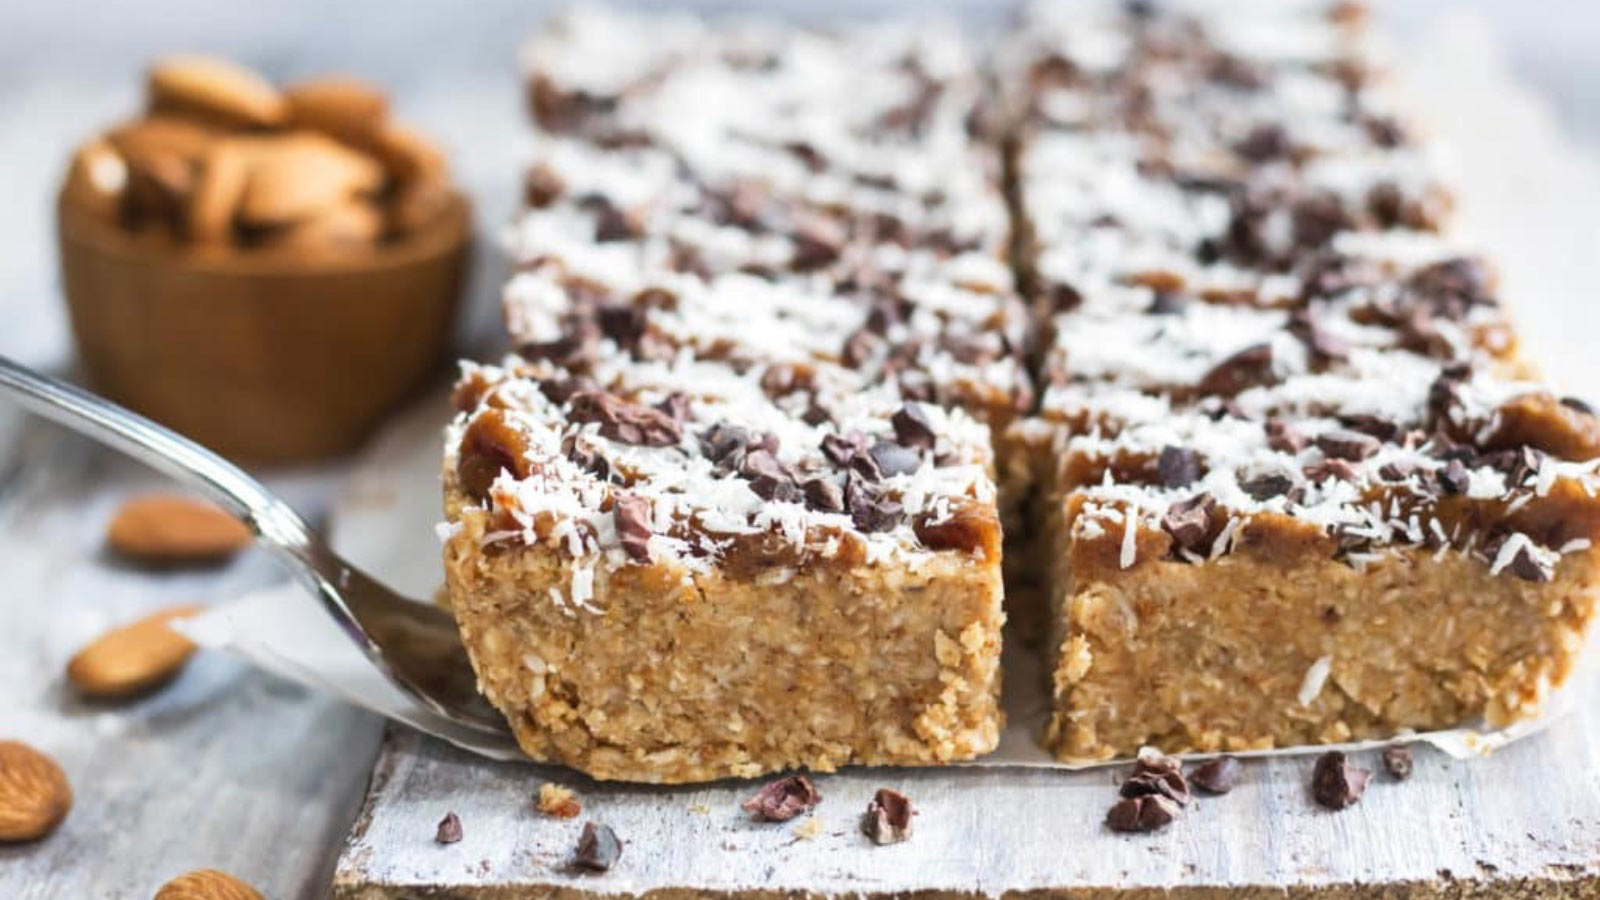 Magic bars lined up on a wood surface, cut into serving sizes. A spatula reaches under one bar to lift it up.